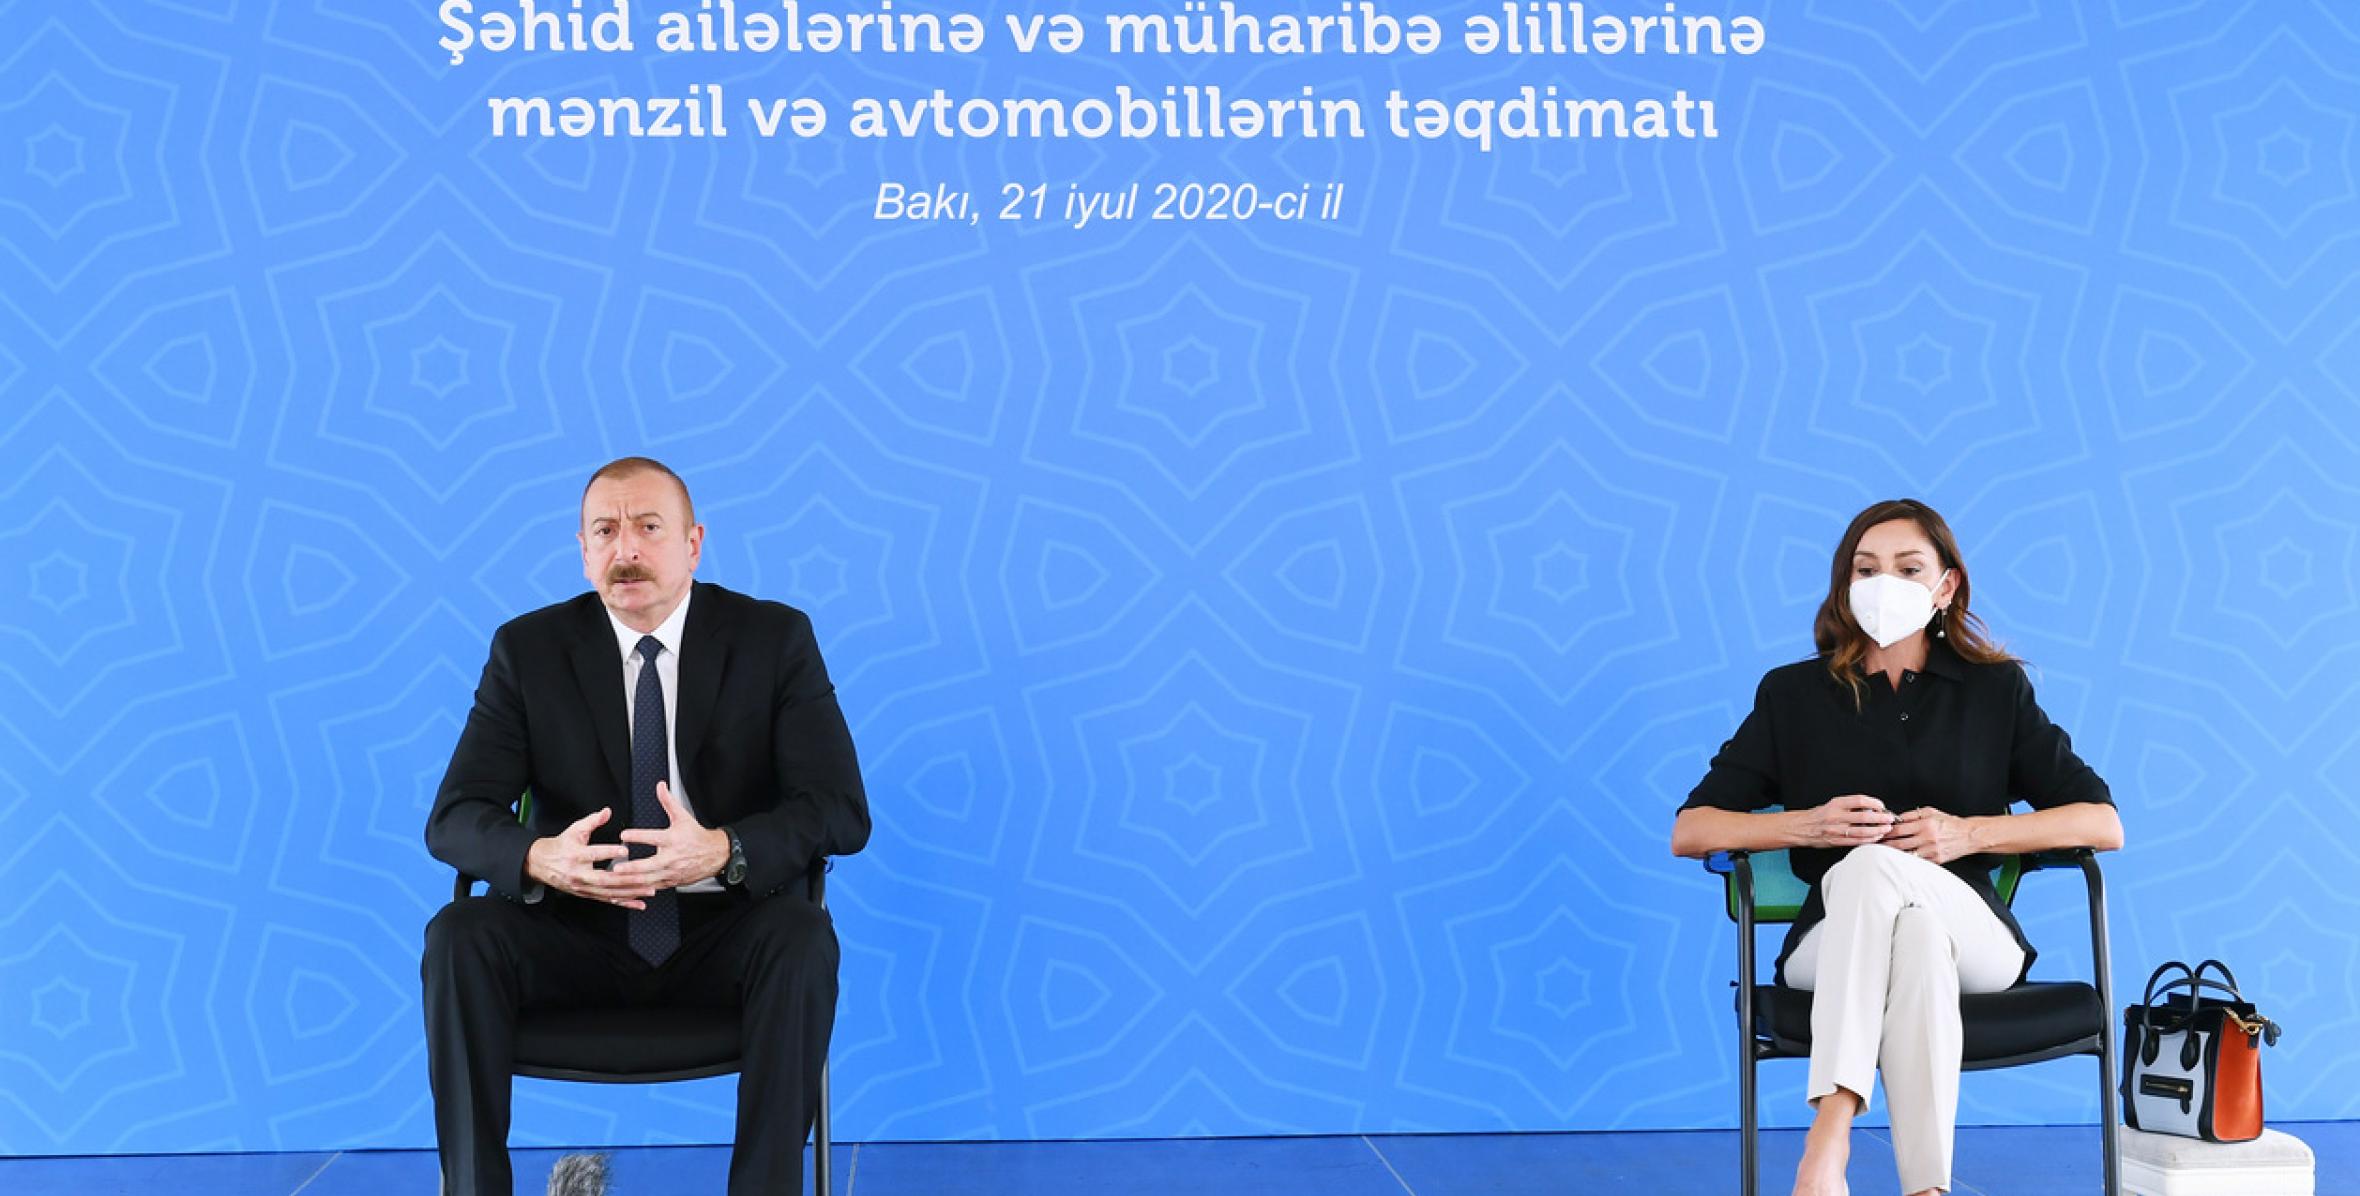 Speech by Ilham Aliyev at the ceremony to give out apartments and cars to families of martyrs and war disabled